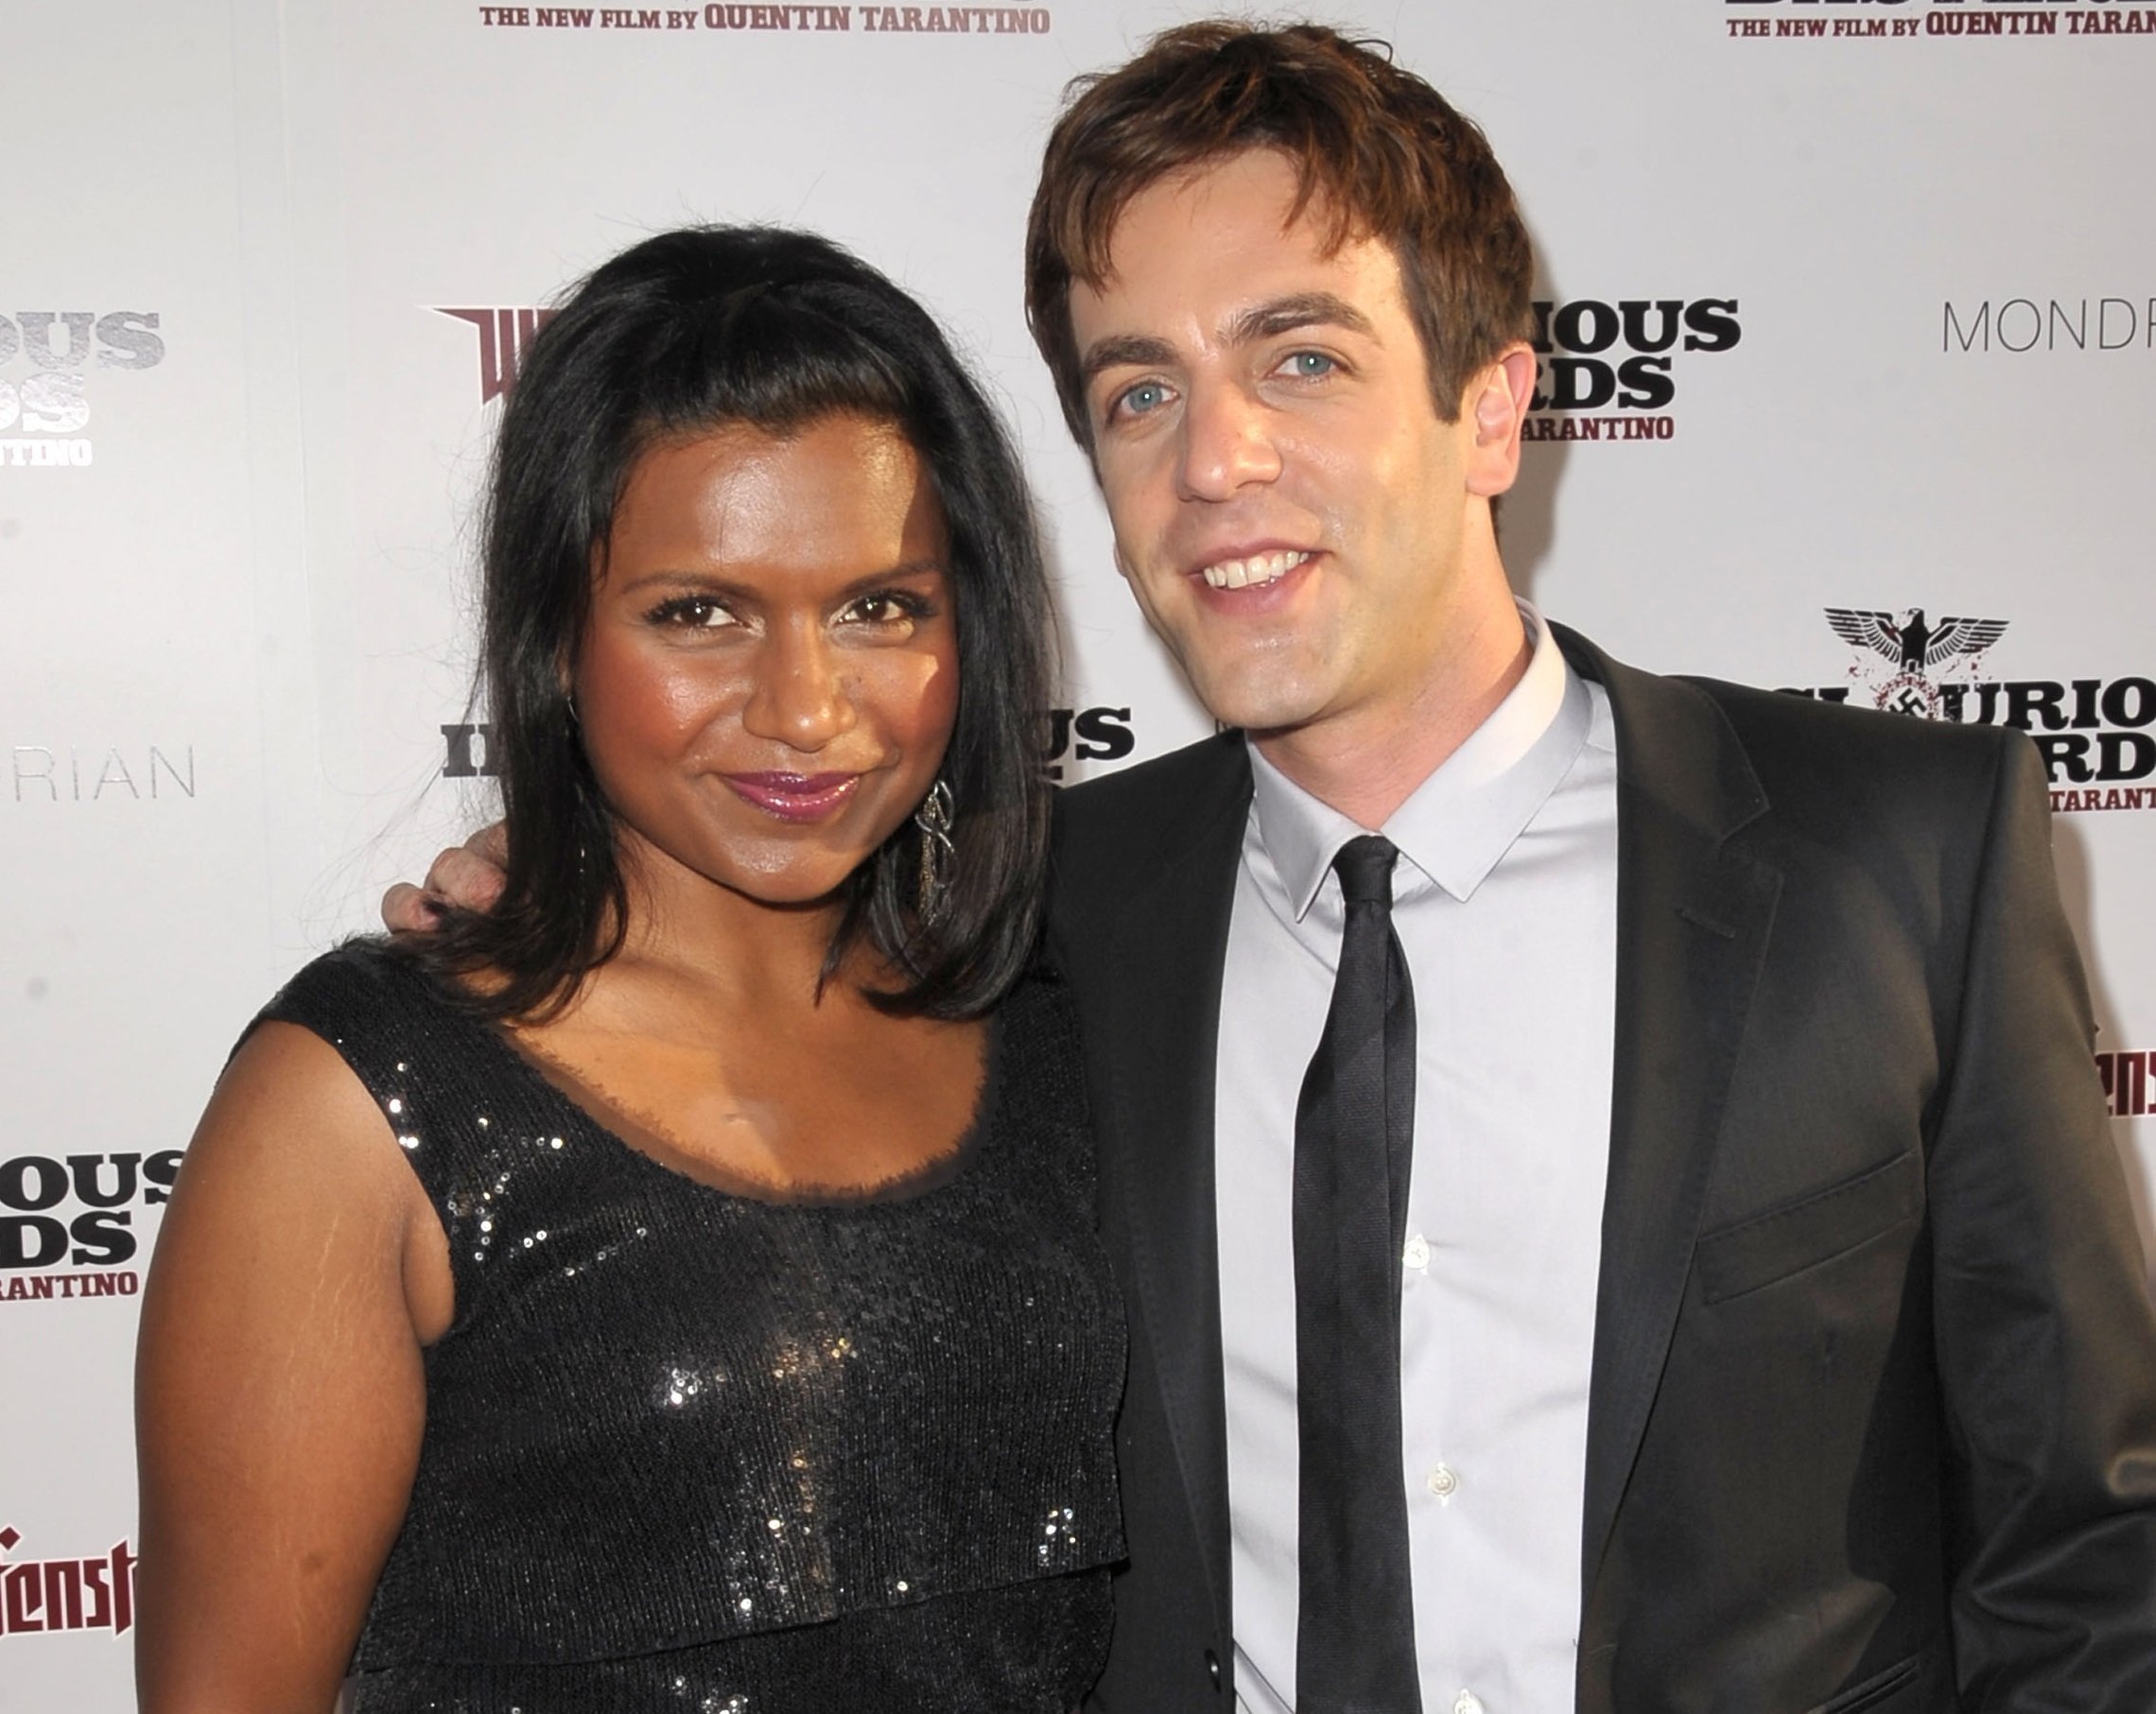 Mindy Kaling and B.J. Novak arrive at the 'Inglourious Basterds' premiere on August 10, 2009